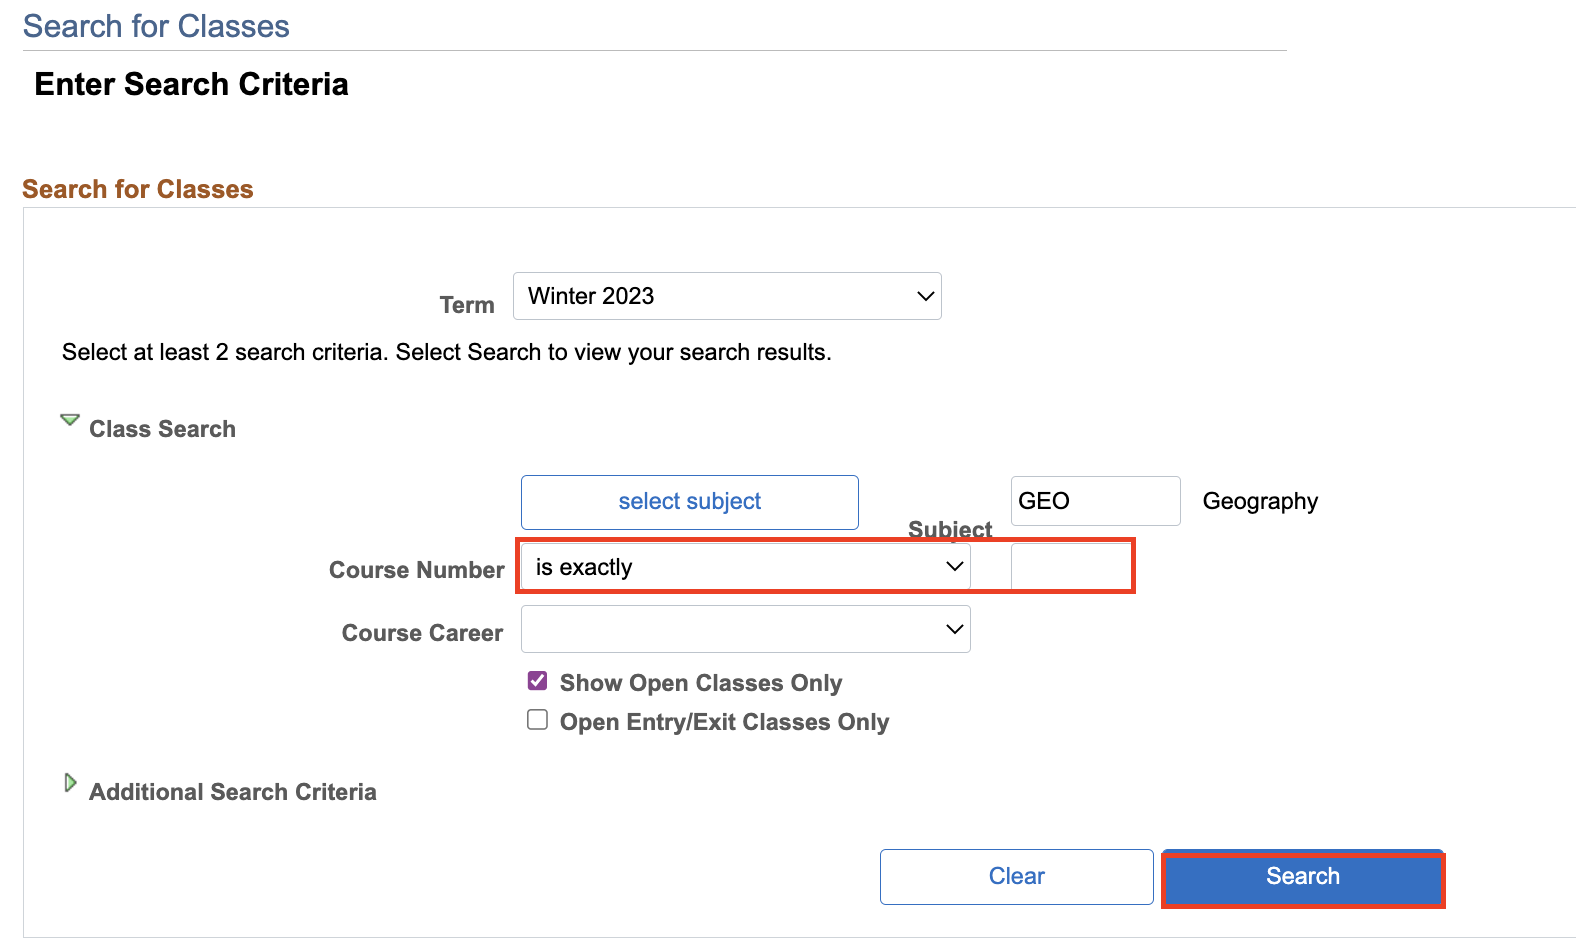 Show Open Classes Only checkbox in Search for Classes section.